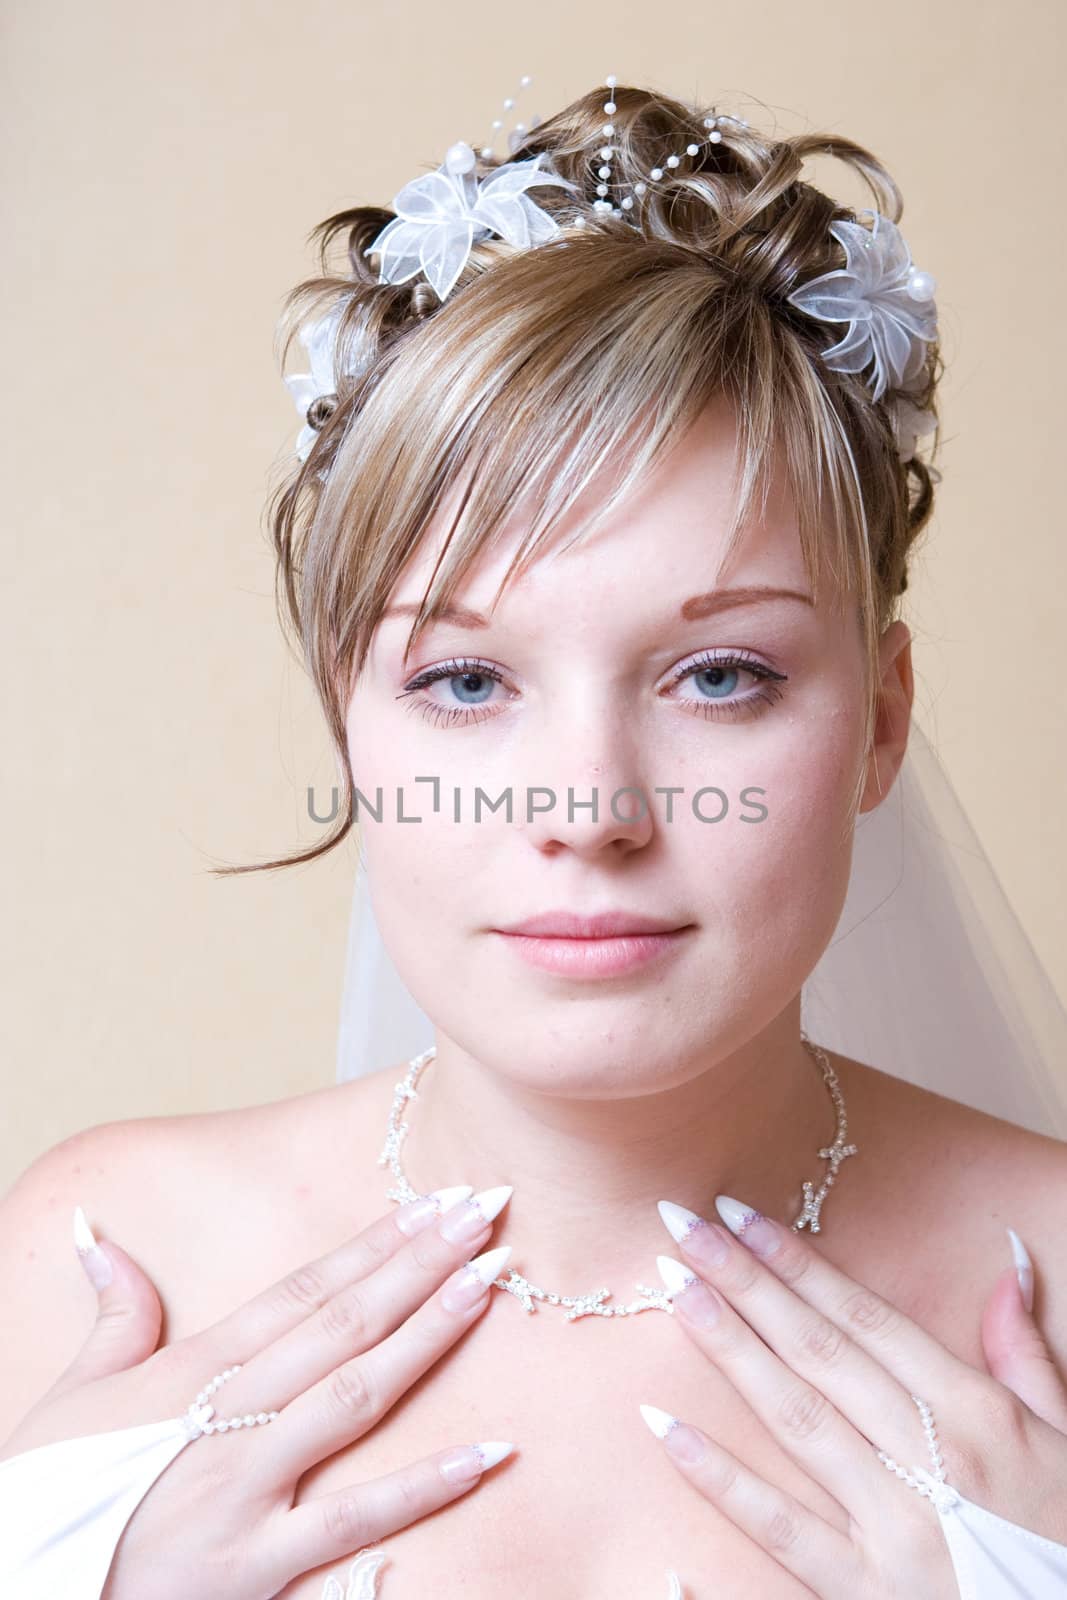 necklace on the neck of bride by vsurkov